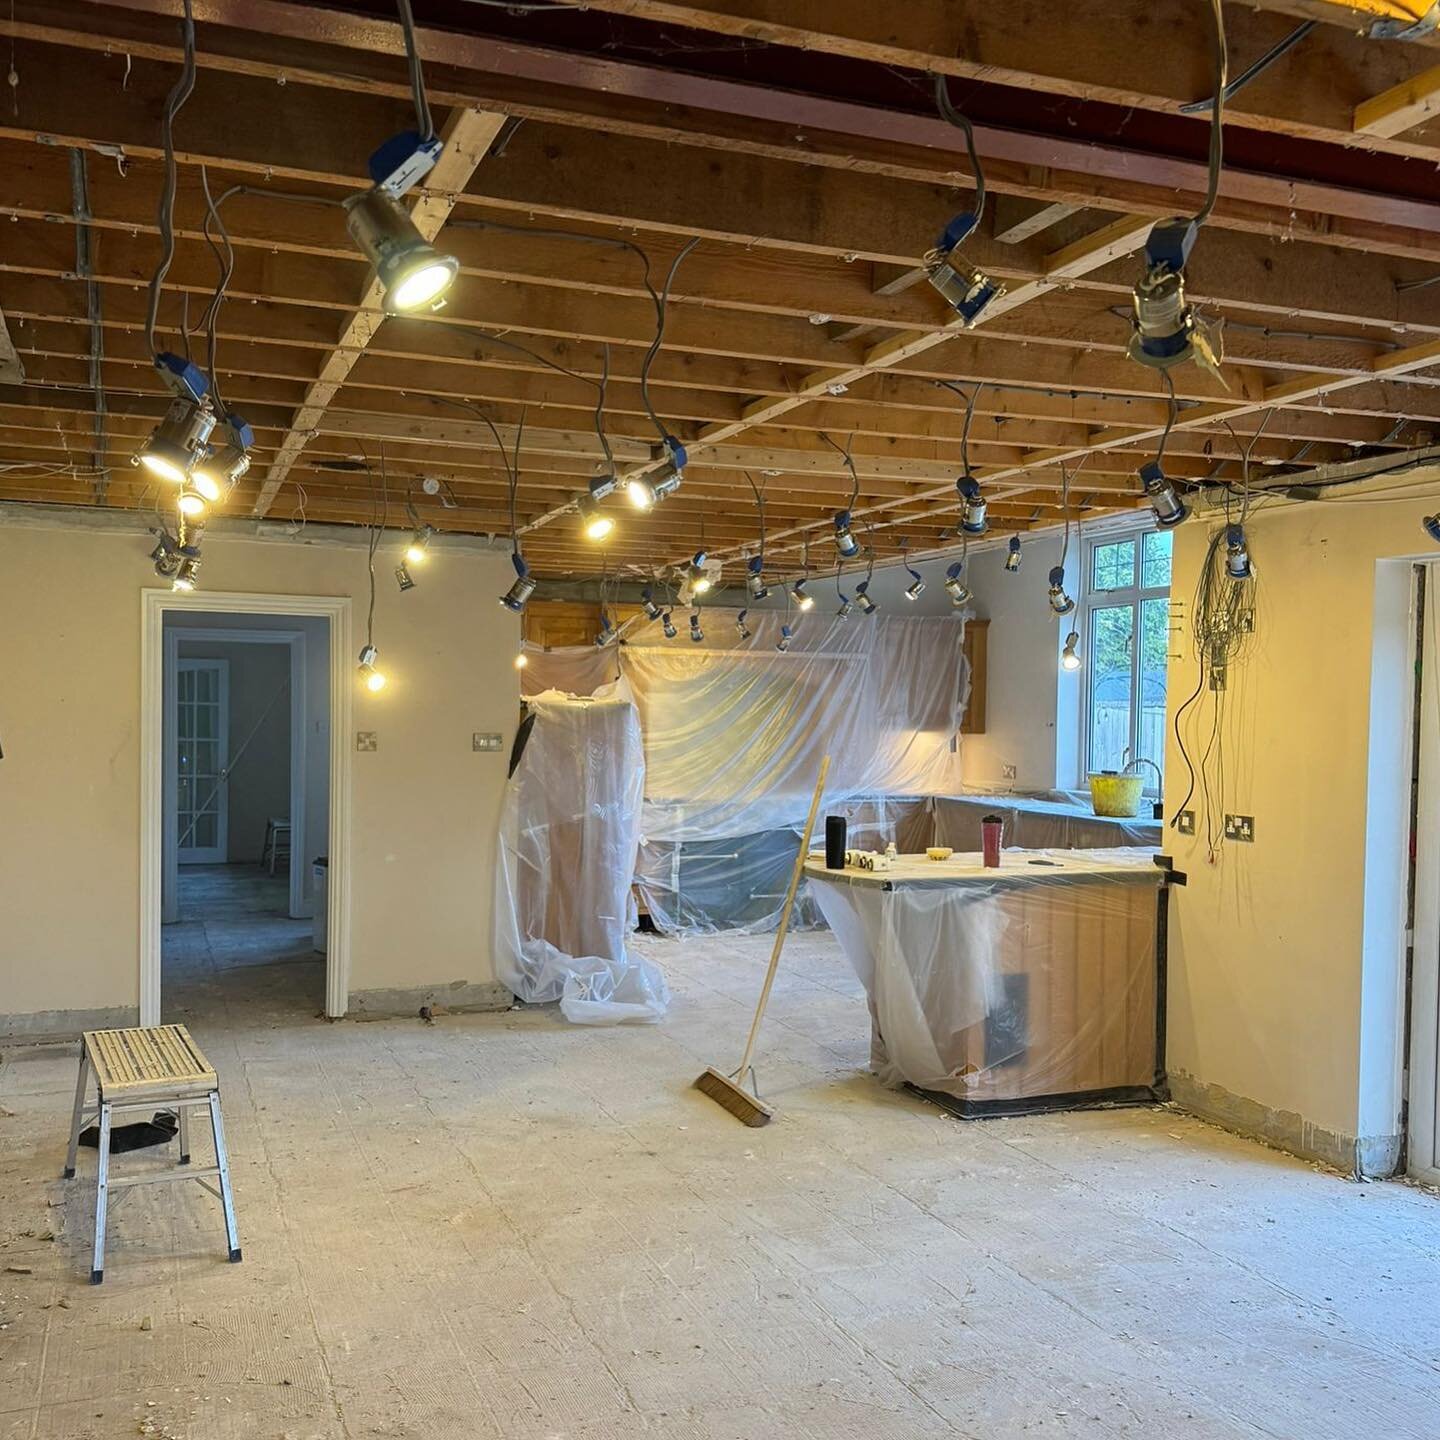 The Eastergate remodel and refurbishment is making great progress. 

This is 7 days into the project, swipe right to have a sneak peek. 

#Refurbishment #Remodel #Chichester